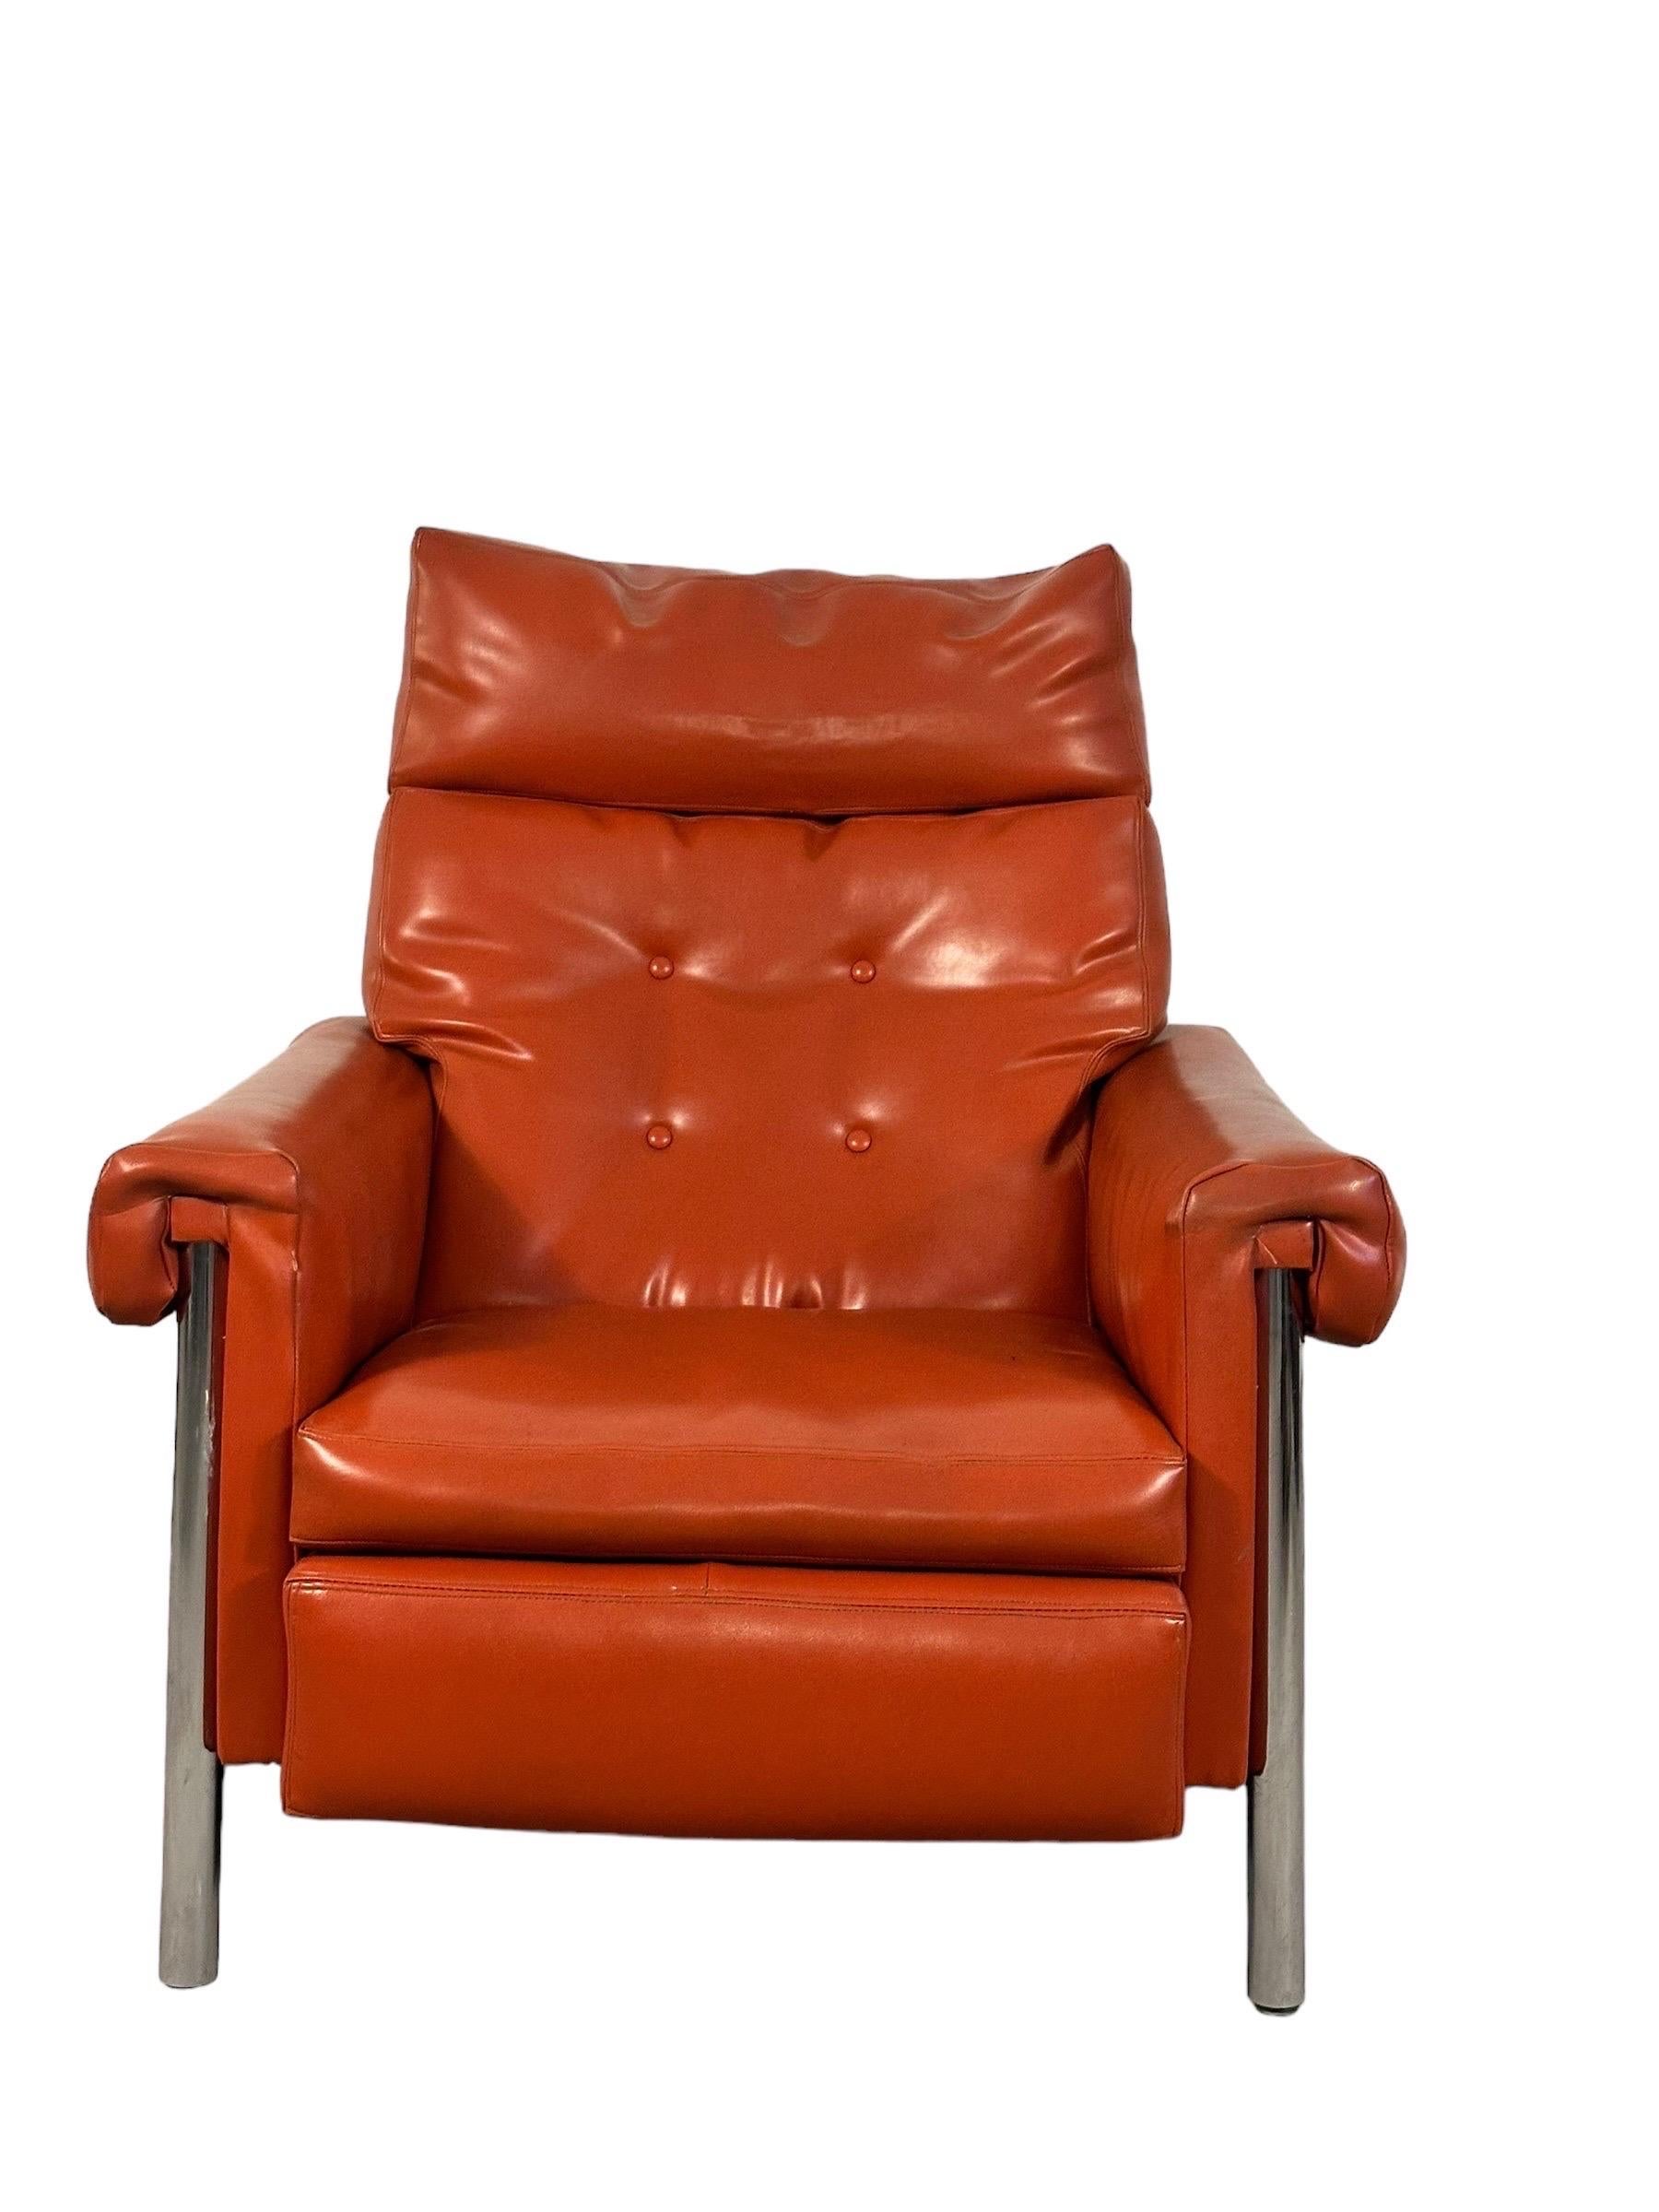 Mid Century Modern Chrome Recliner Lounge Chair For Sale 2